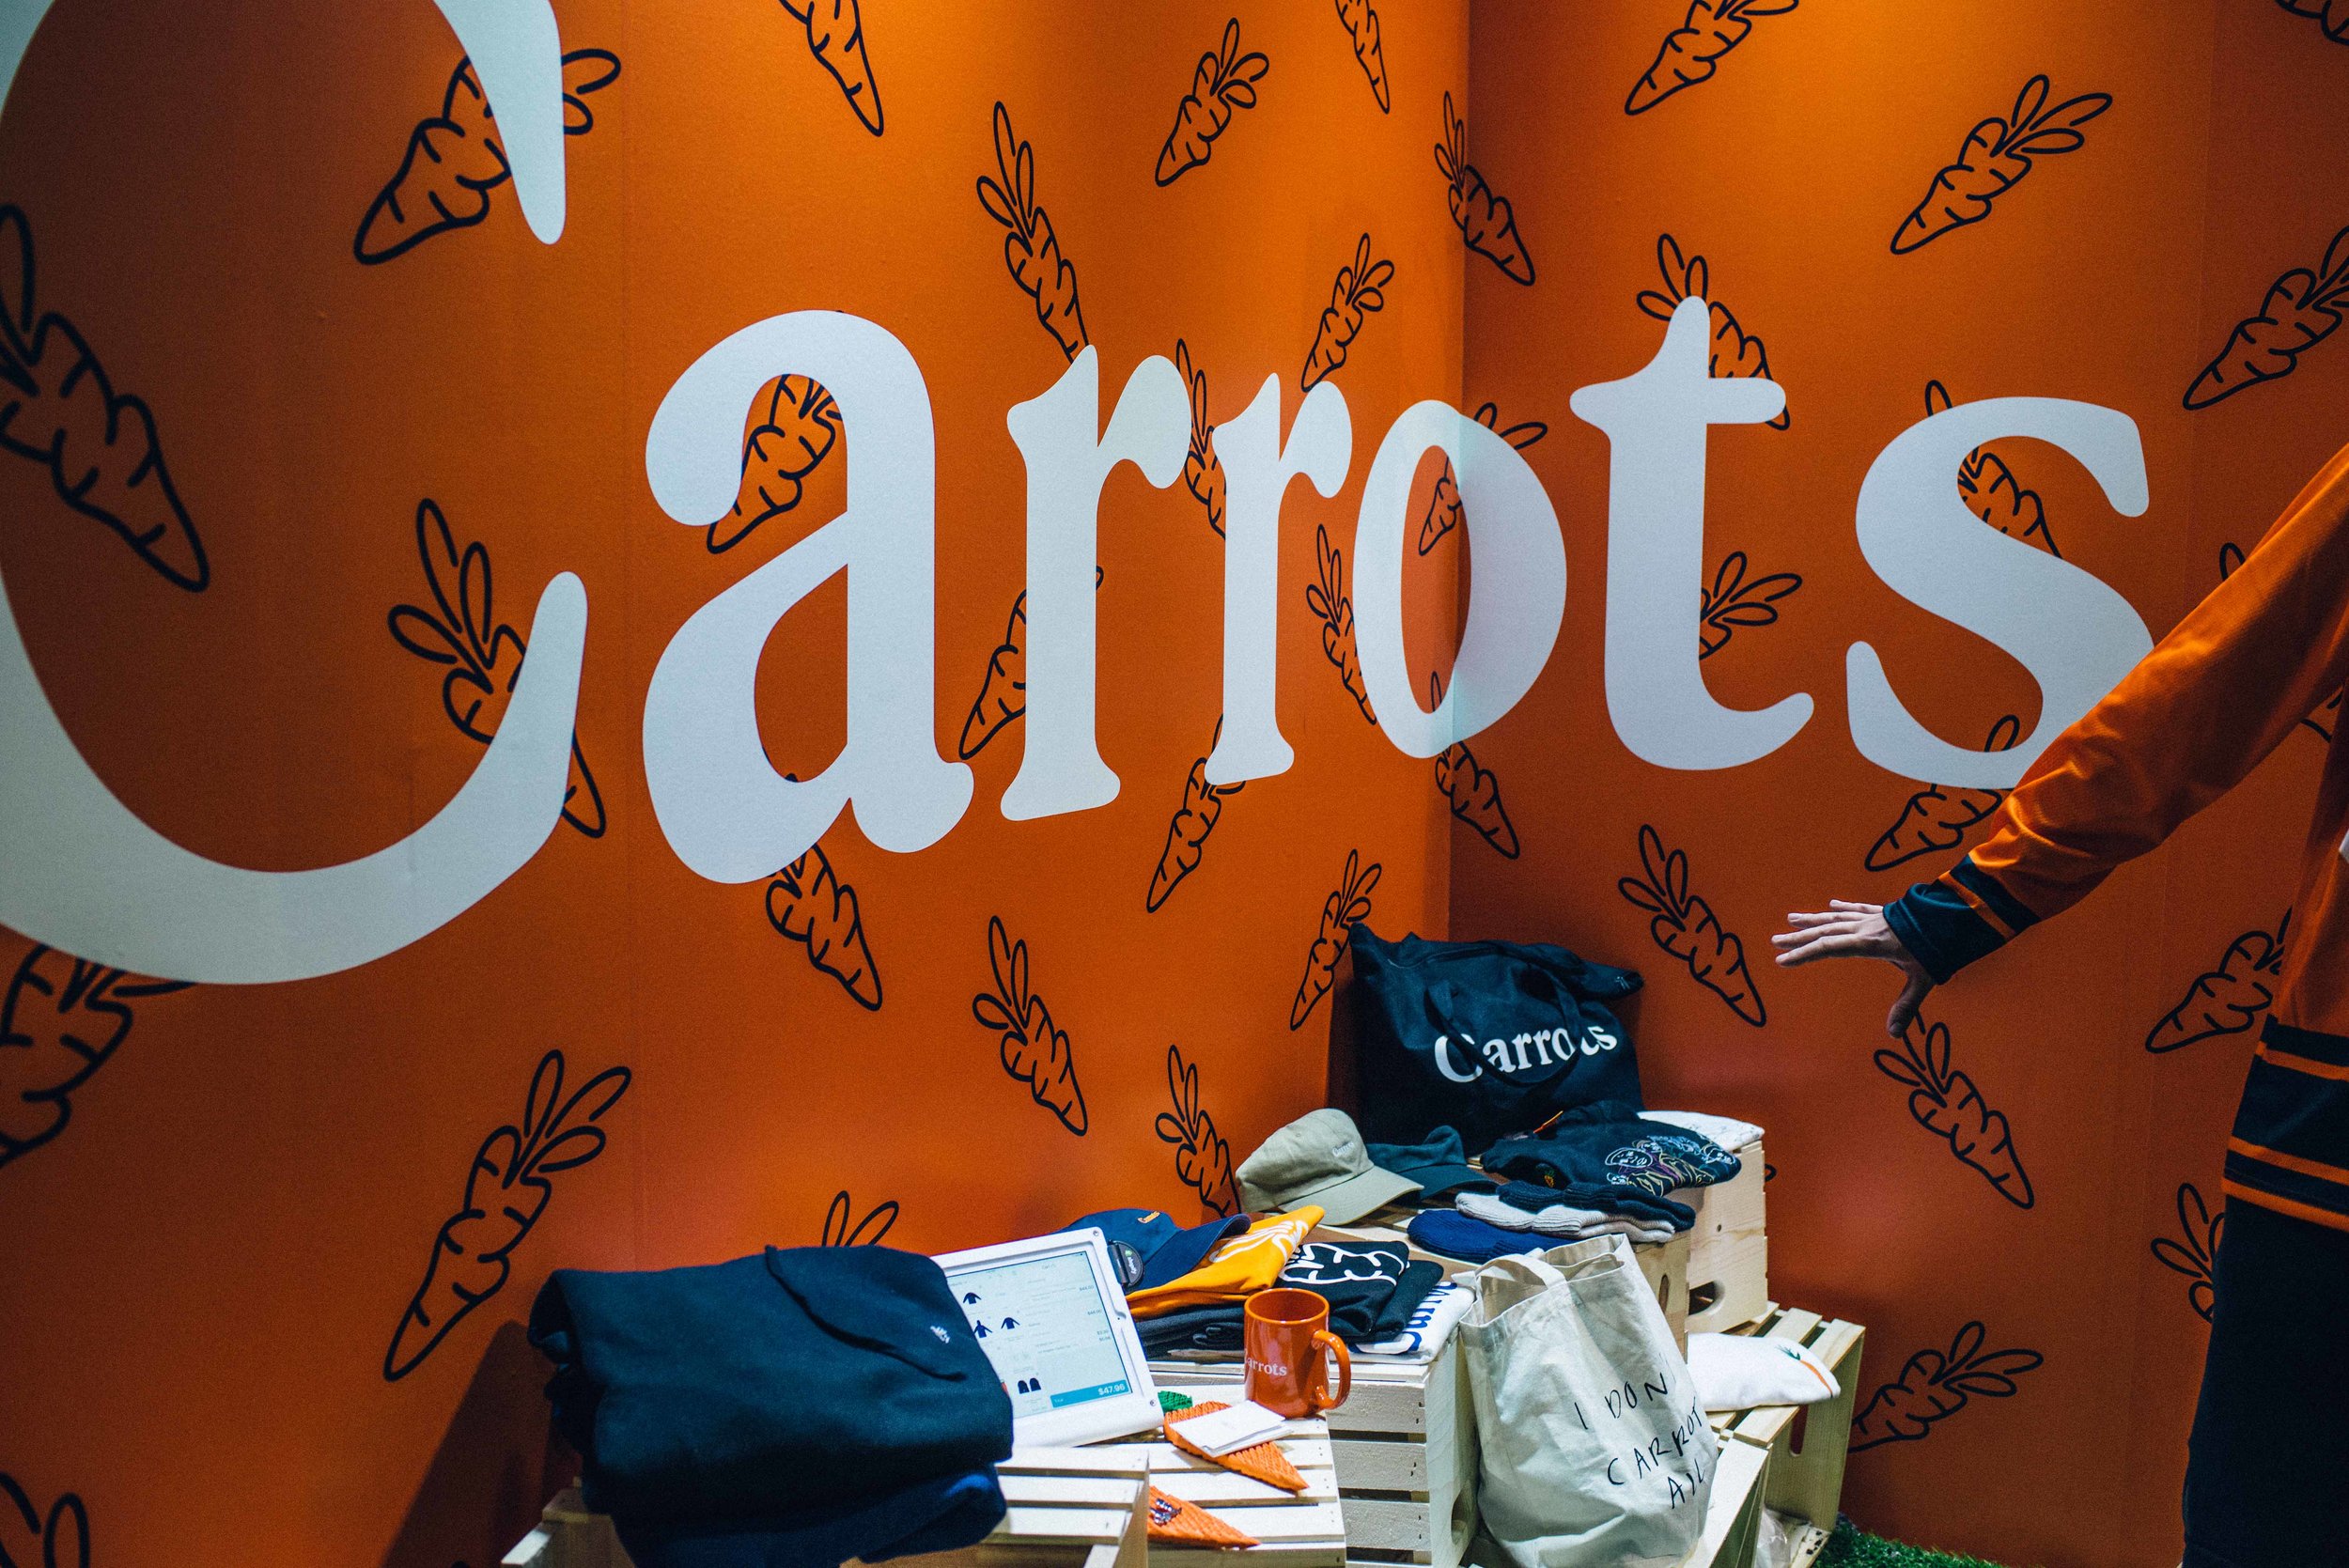  Carrots by Anwar Carrots at ComplexCon 2016. / Photo: © Diane Abapo for SUSPEND Magazine 